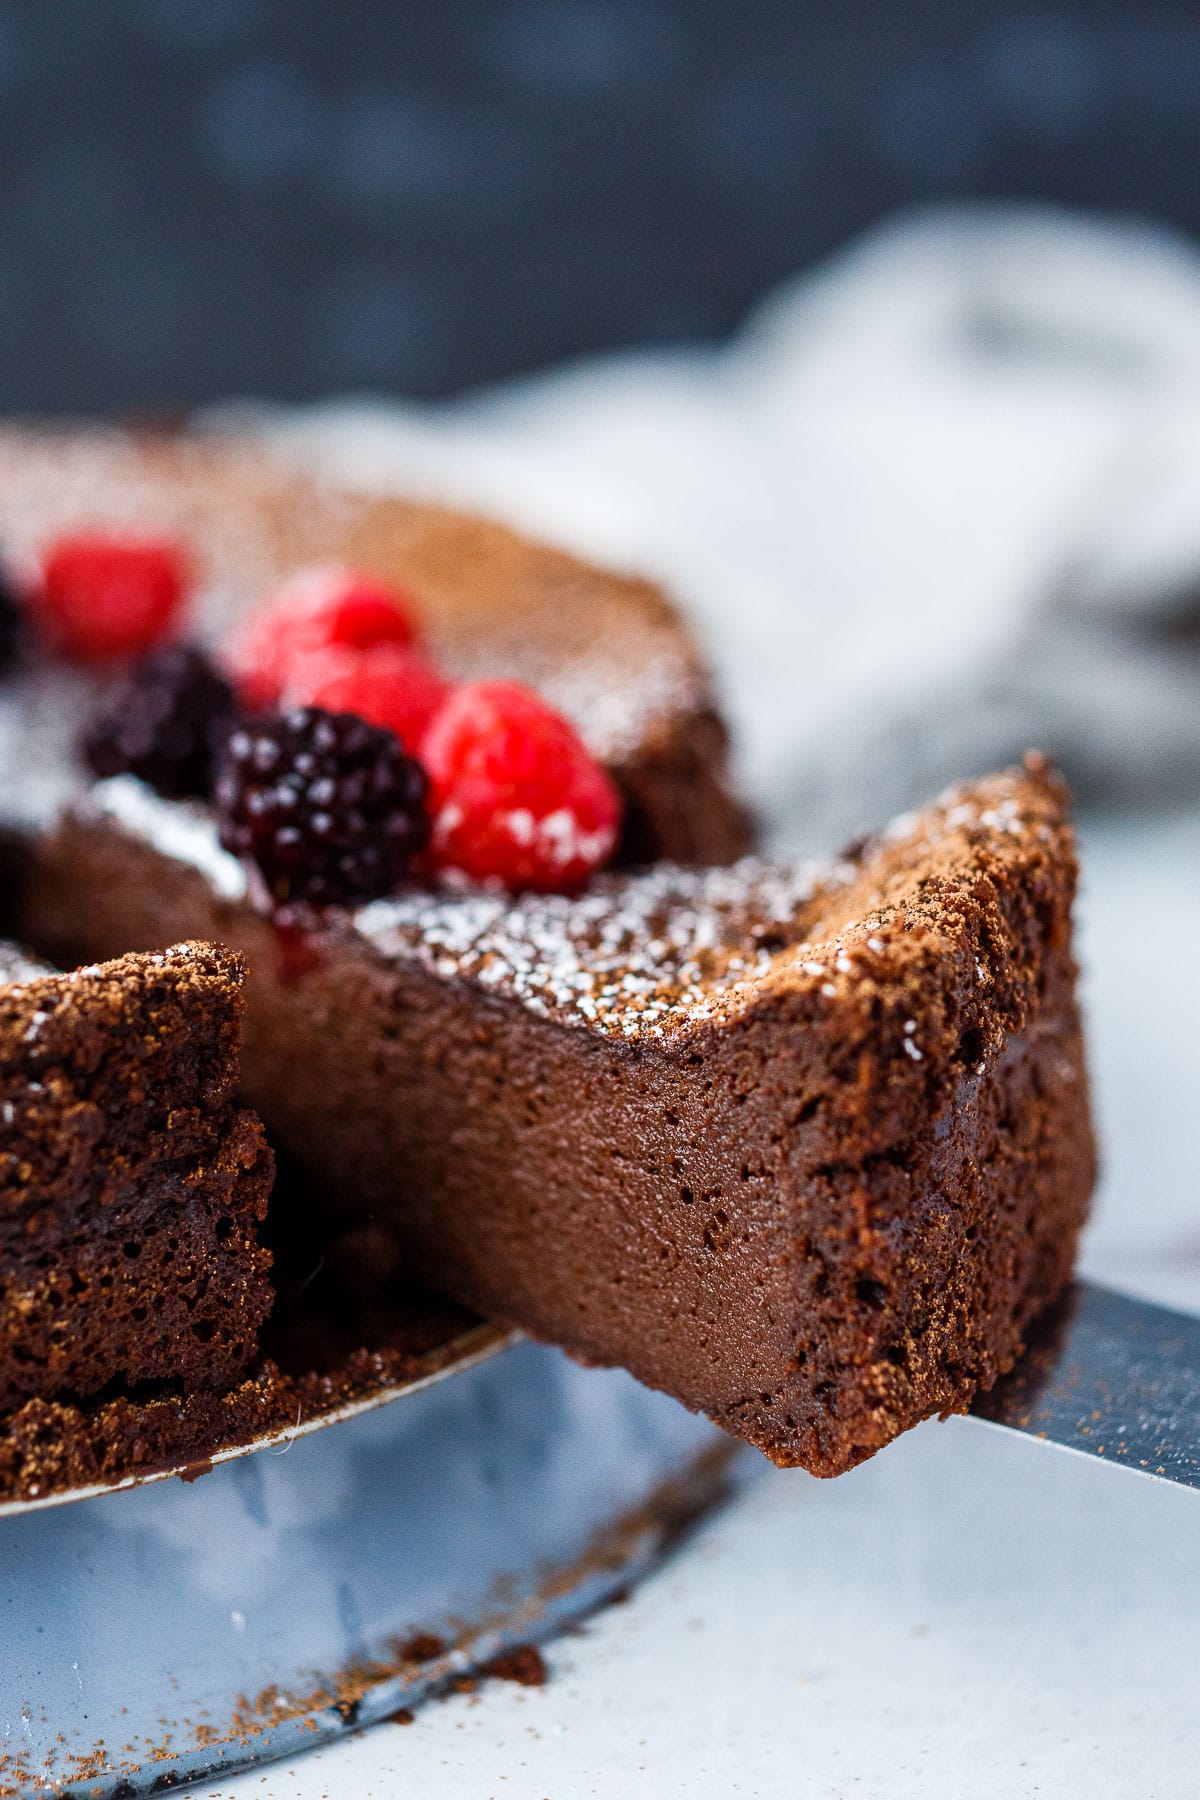 A piece of chocolate torte with powdered sugar and berries.